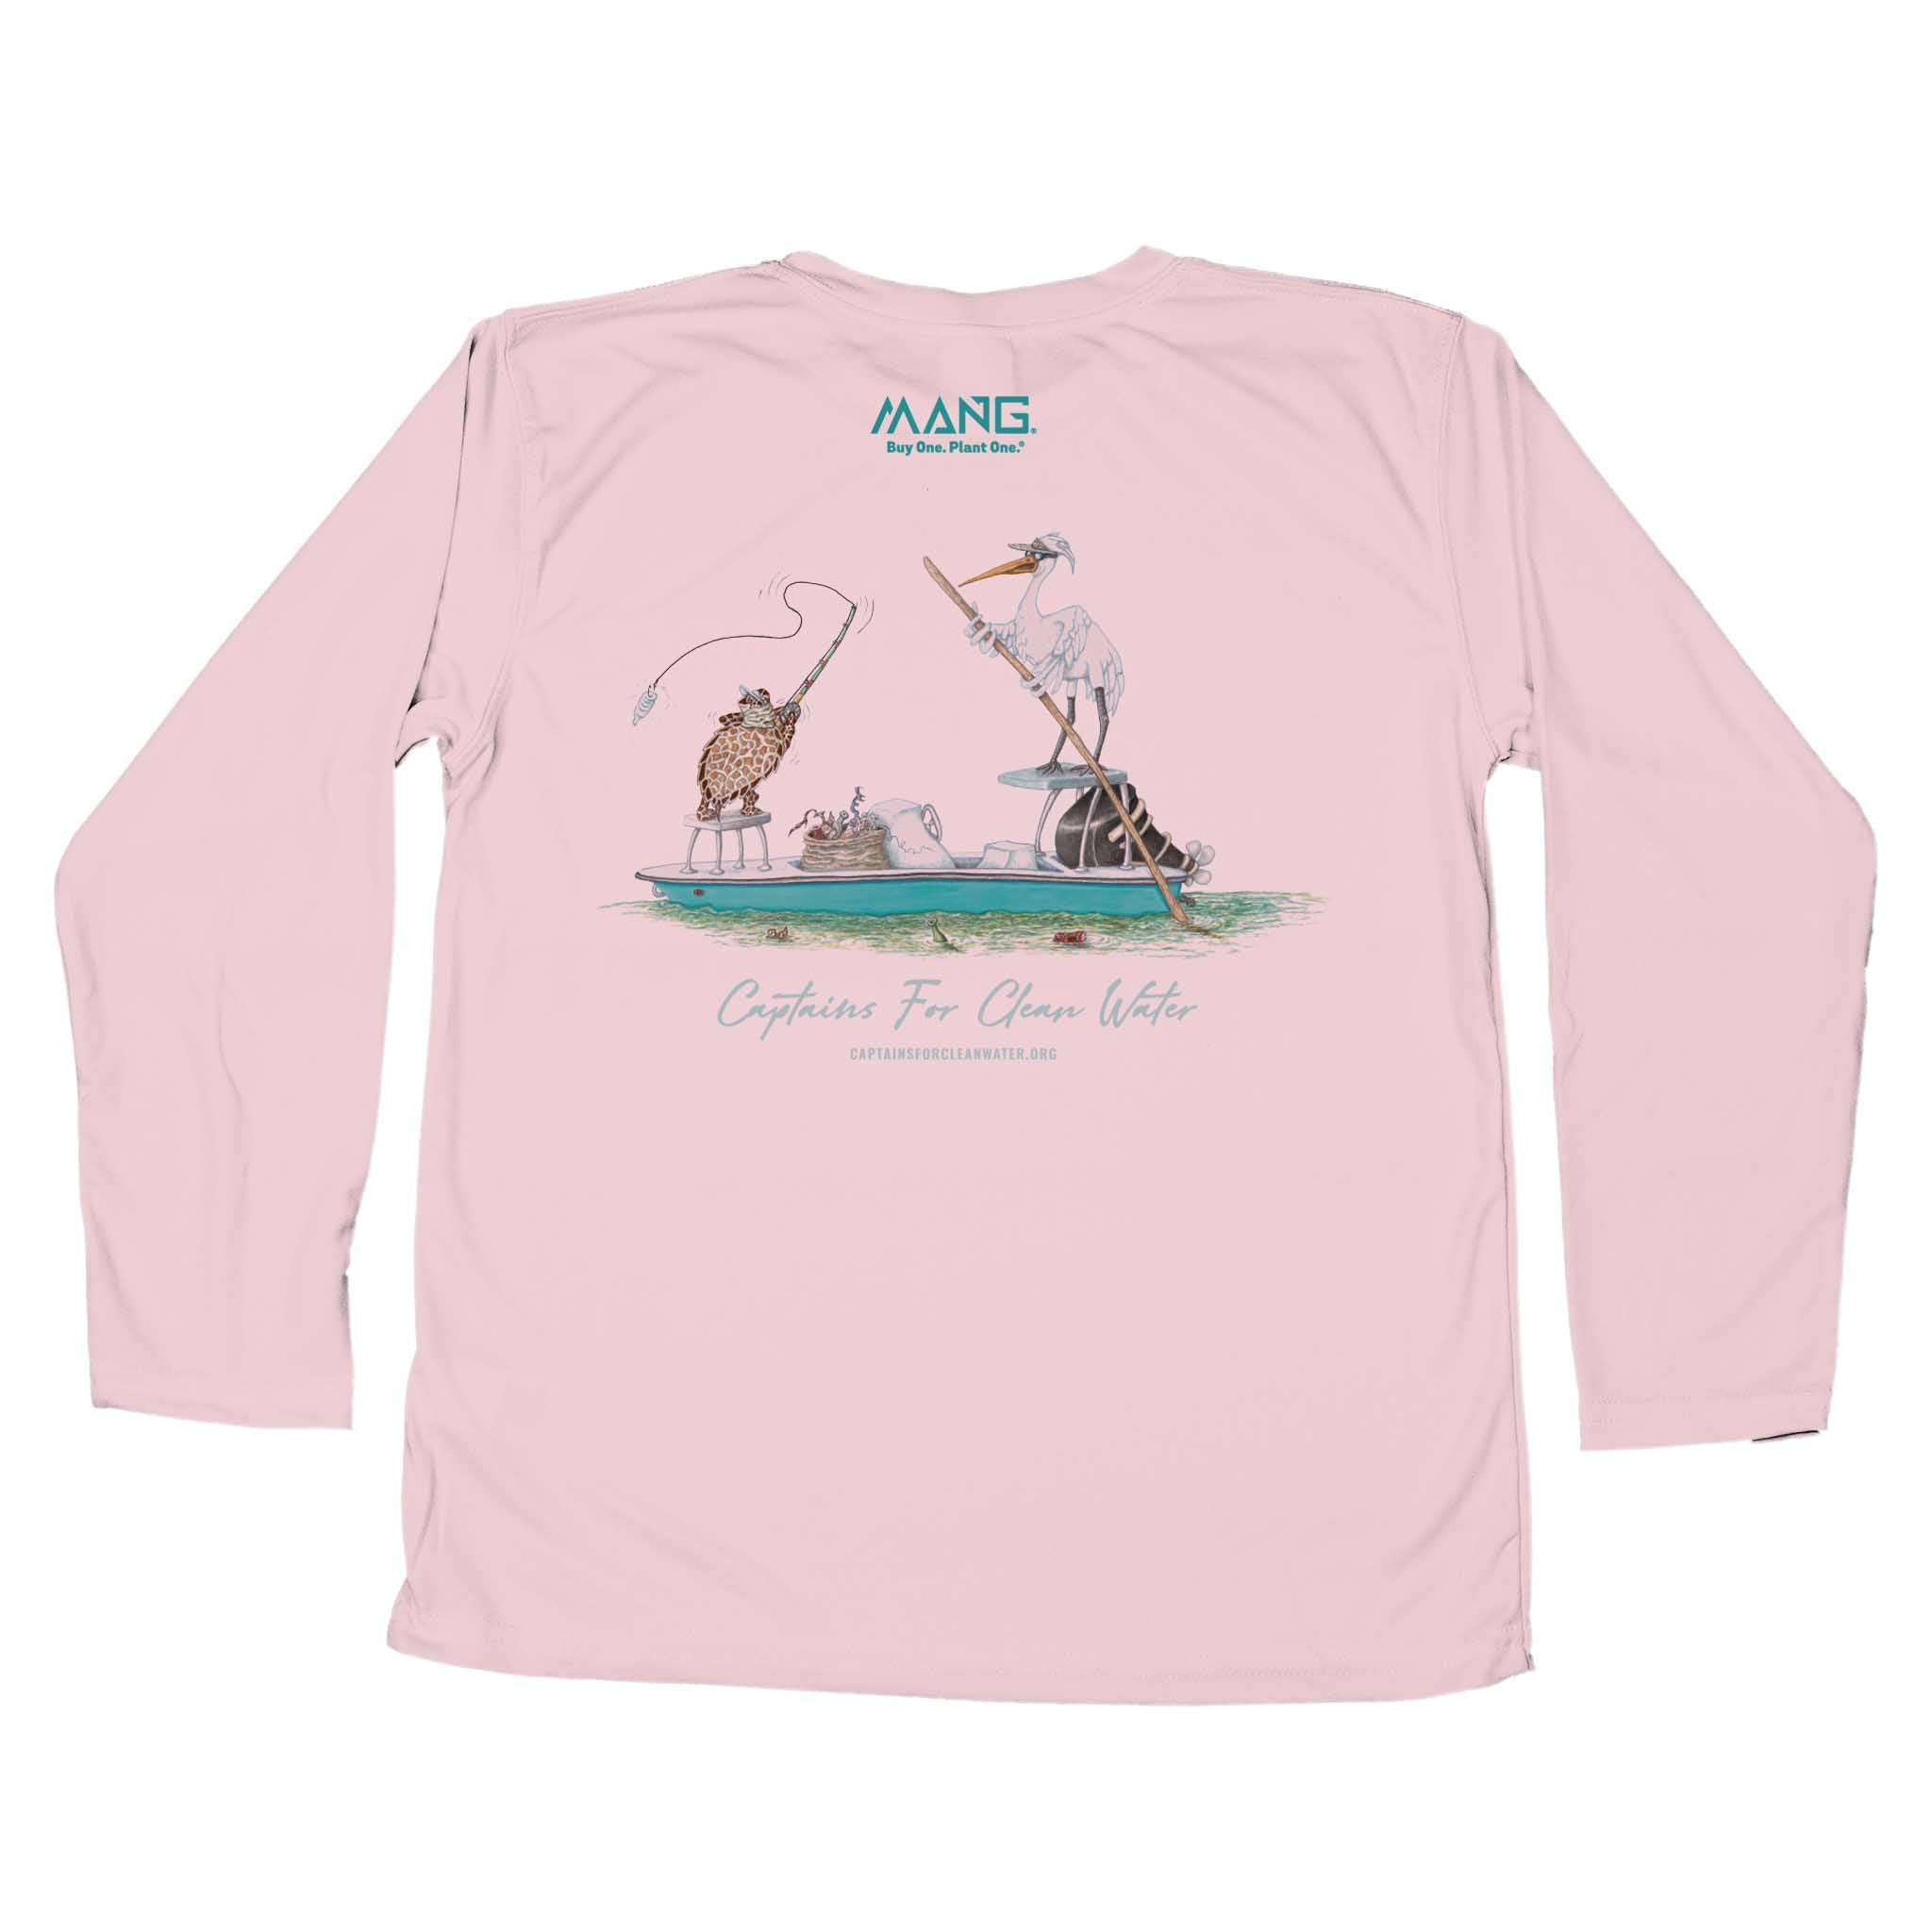 MANG Captain Cleanwater - Youth - YS-Pink